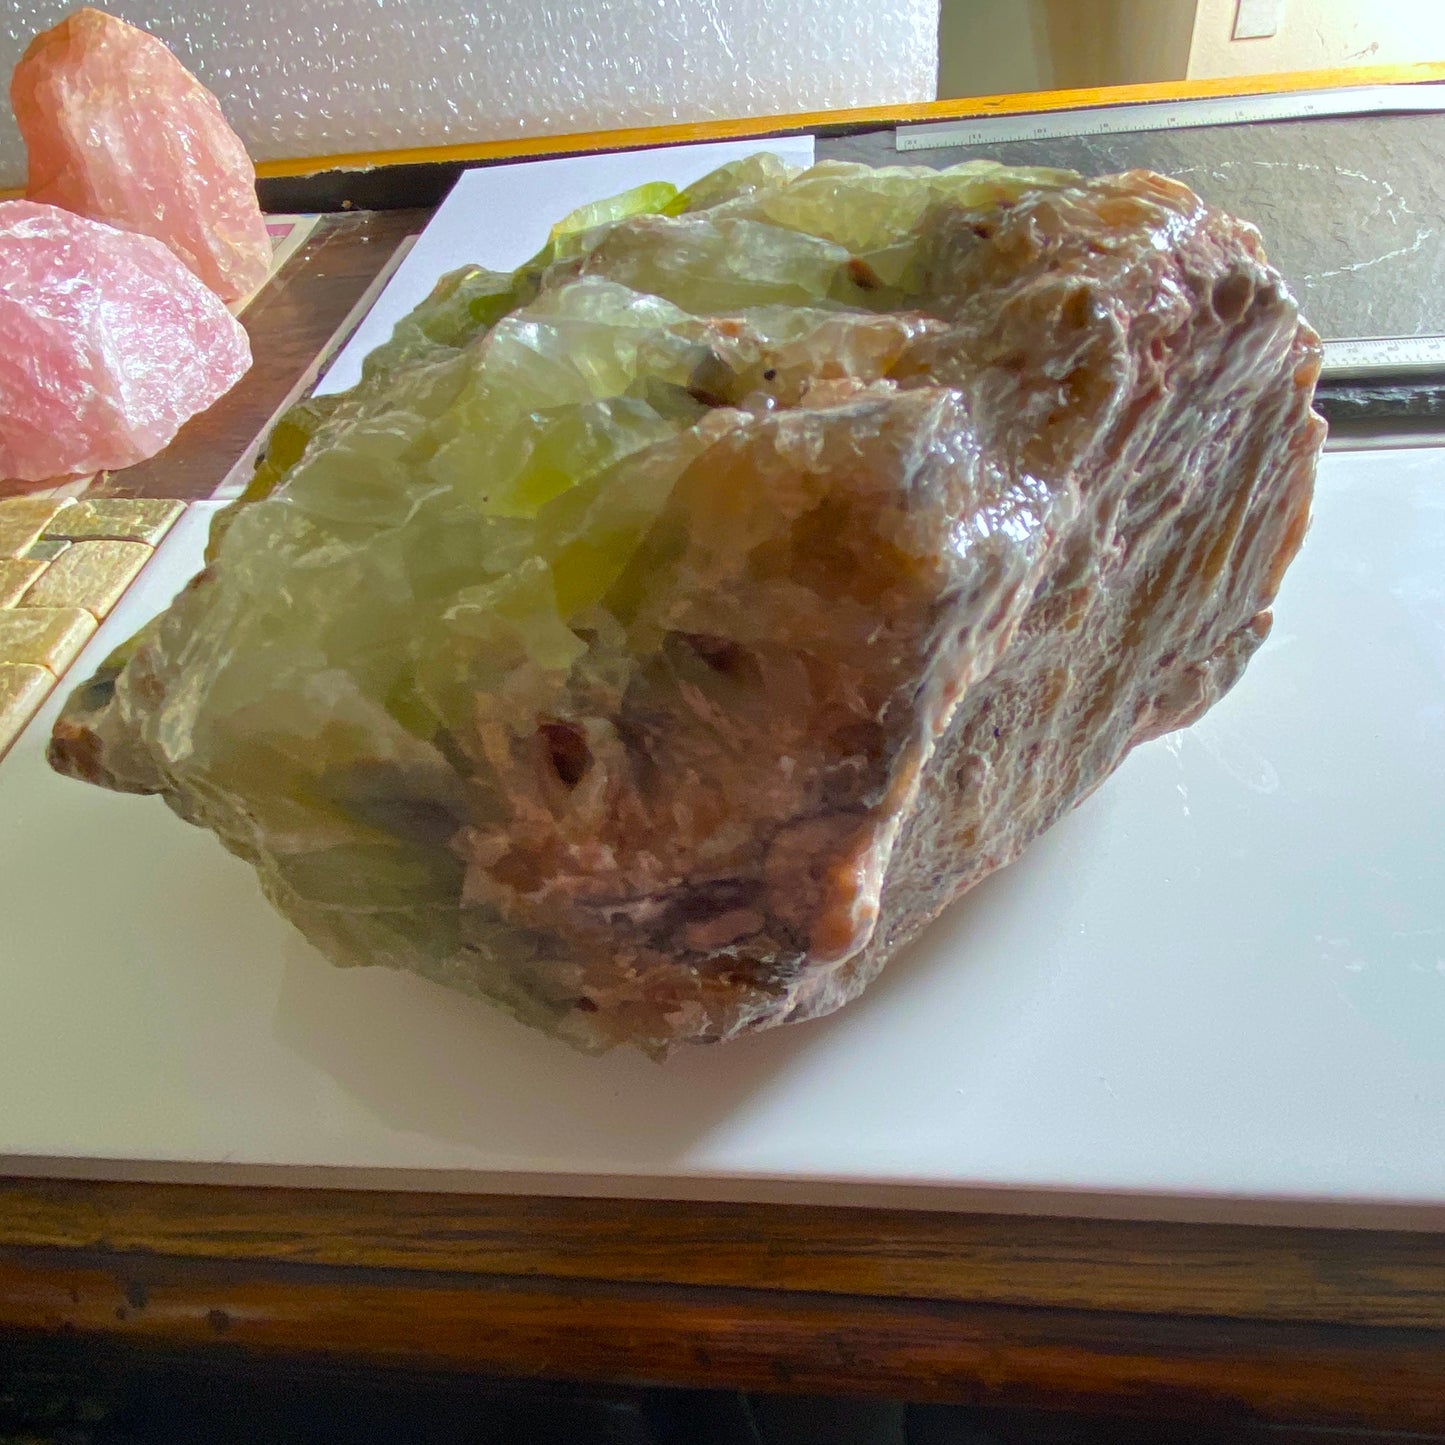 MASSSIVE CALCITE CRYSTAL ASSEMBLAGE, DURANGO, MEXICO. SUBSTANTIAL 5.1kg MF1547